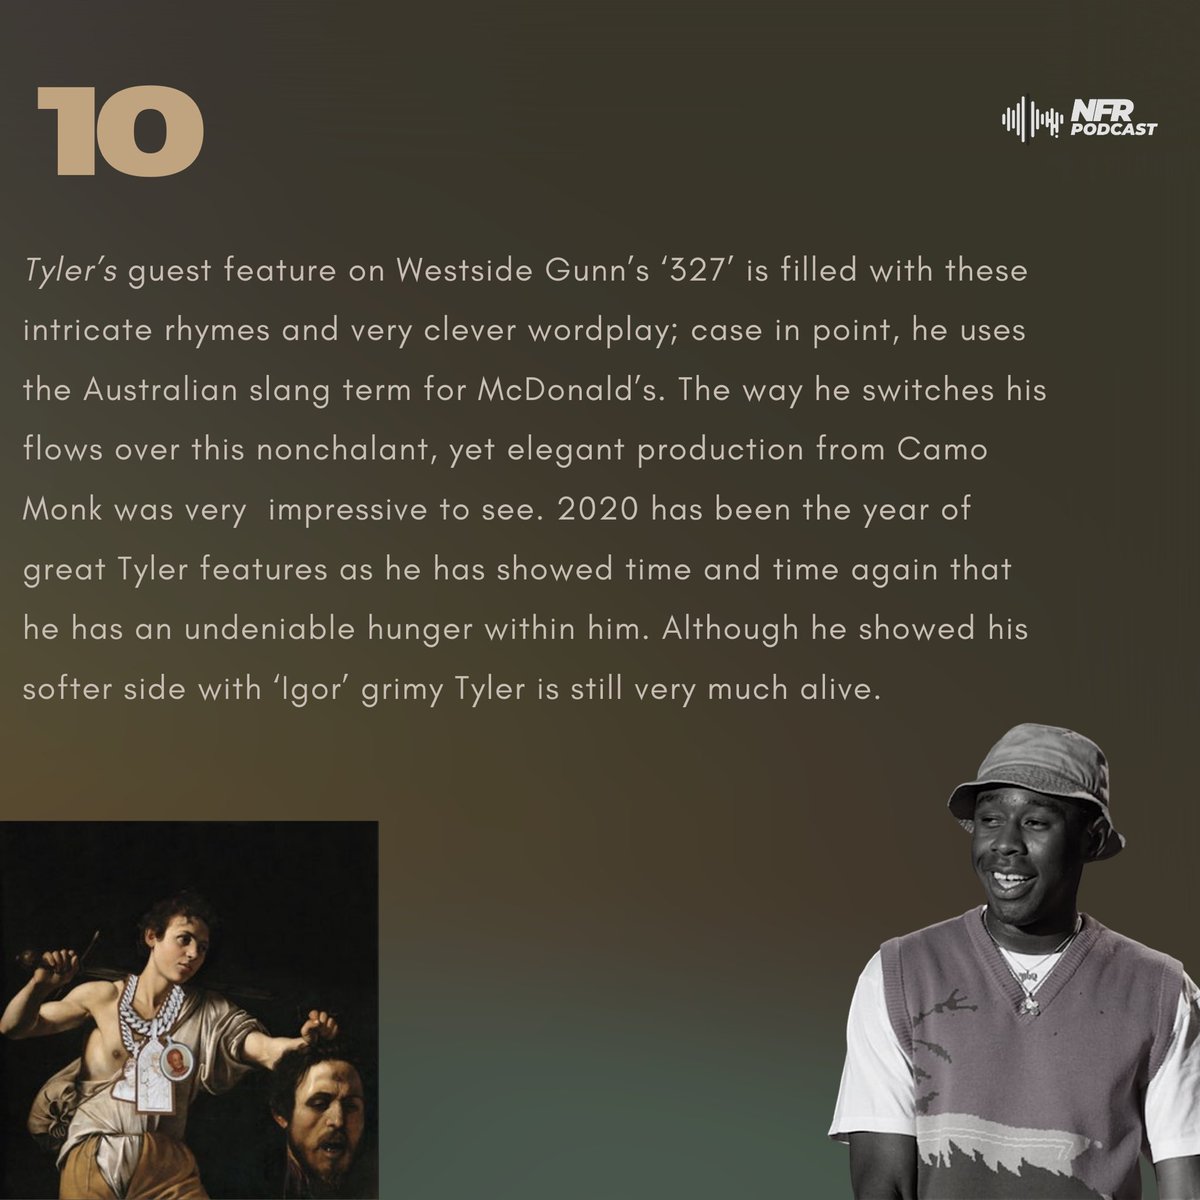 10. Tyler The Creator on '327' (Verse 3)“I turned nothin' to somethin', skin glowin', my hair nappy, My health good, my mama good, my n***** too, And they only wanna have good times like Josh Safdie, We eat good, long way from Maccas burgers”